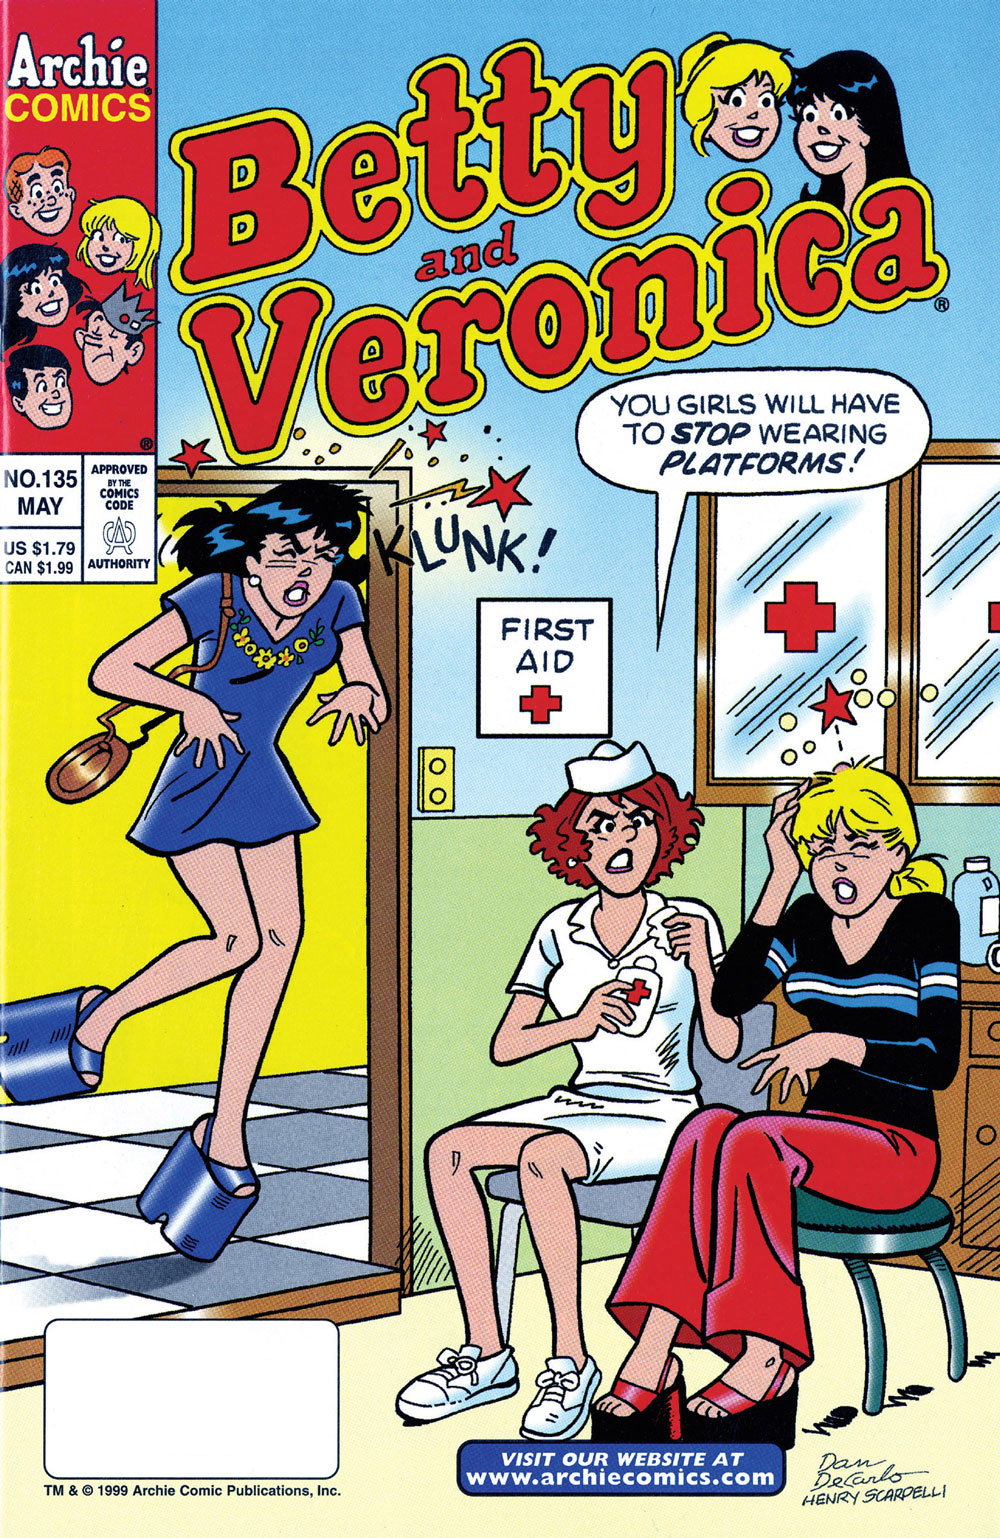 Veronica bumps her head on the doorway on the way into the nurse's office, who says she and Betty will have to stop wearing platform shoes.